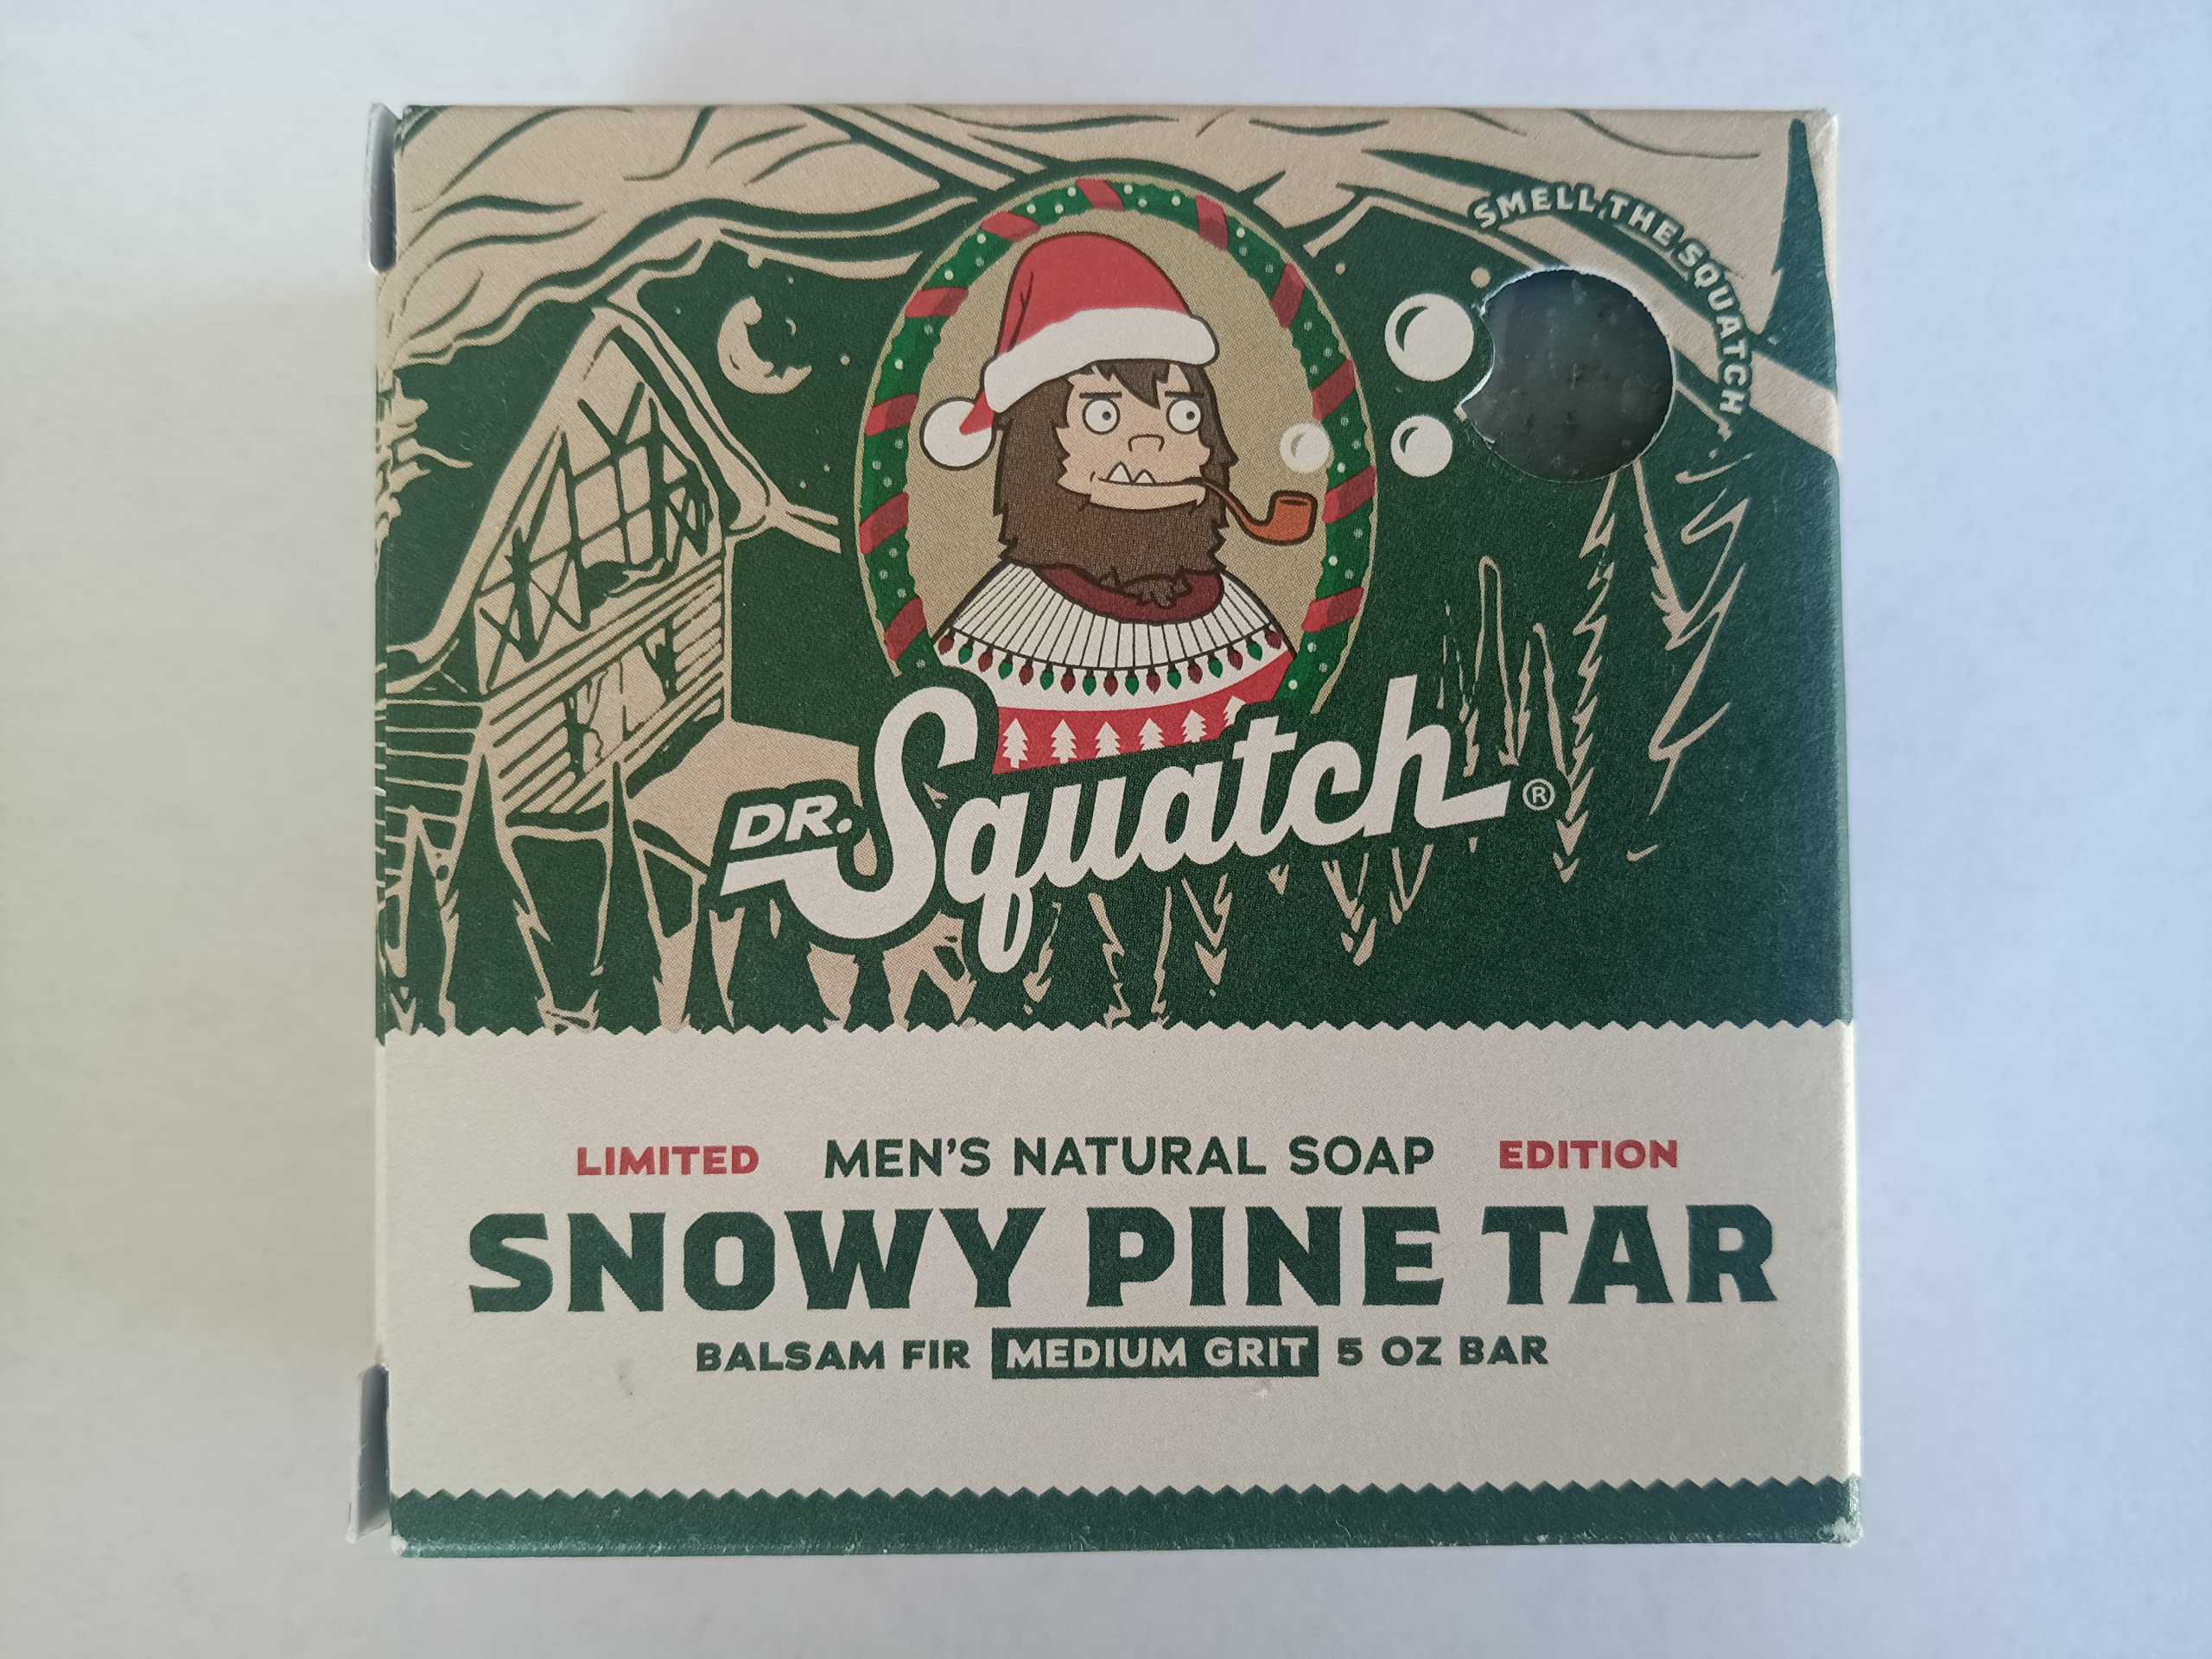  Dr. Squatch All Natural Bar Soap for Men with Medium